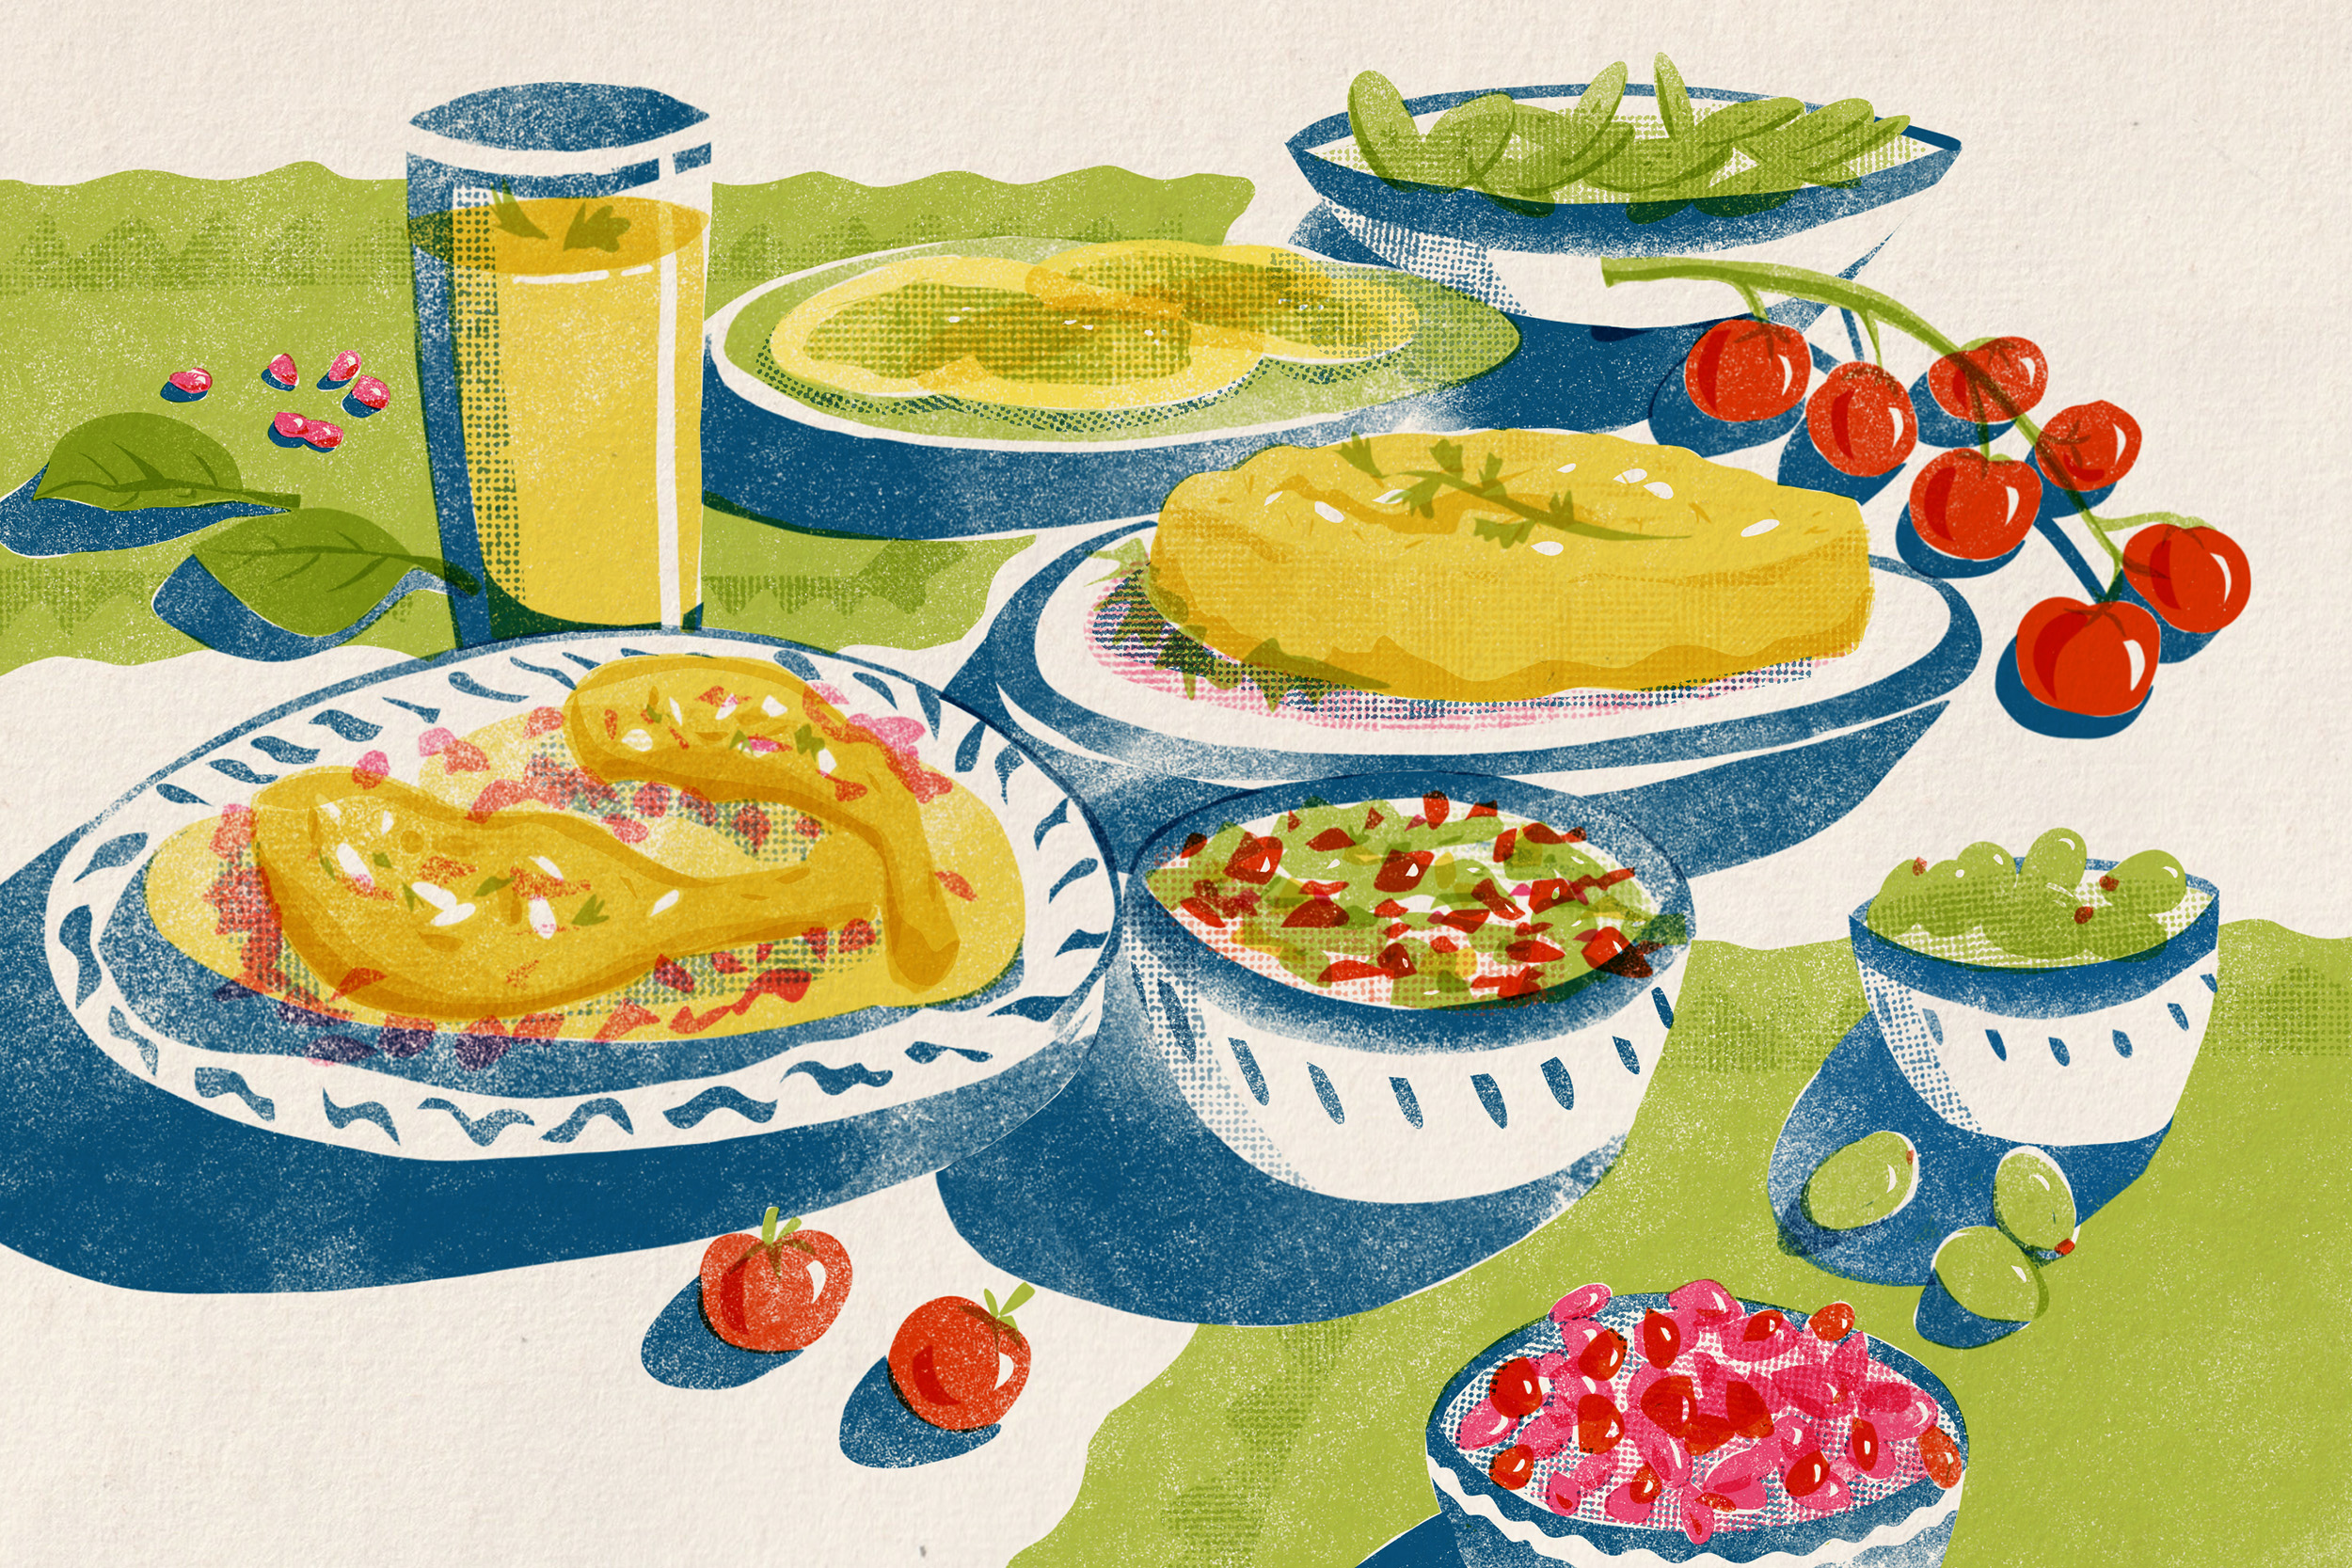 Faded art of foods on decorative plates set out on a table with bright green, red and yellow colors.